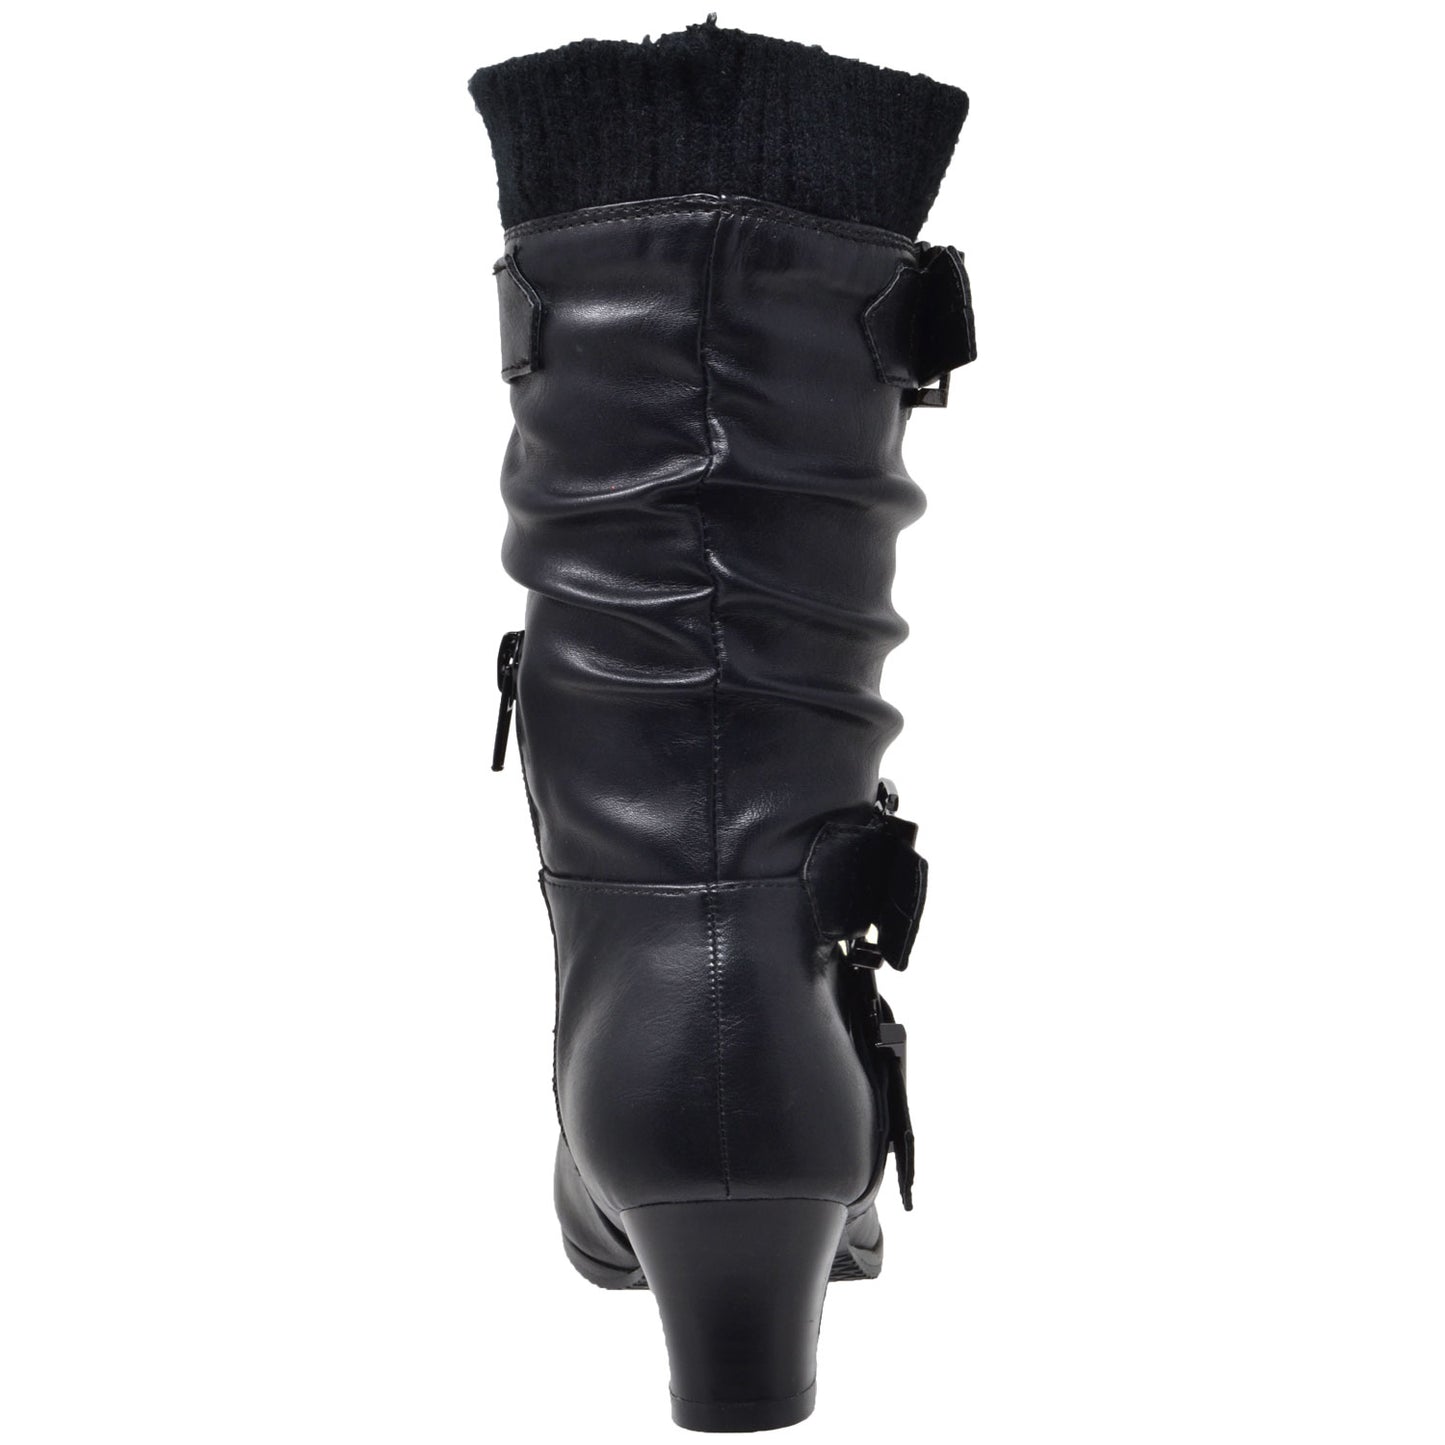 Toddler & Youth Strappy Buckle Heeled Mid Calf Boot